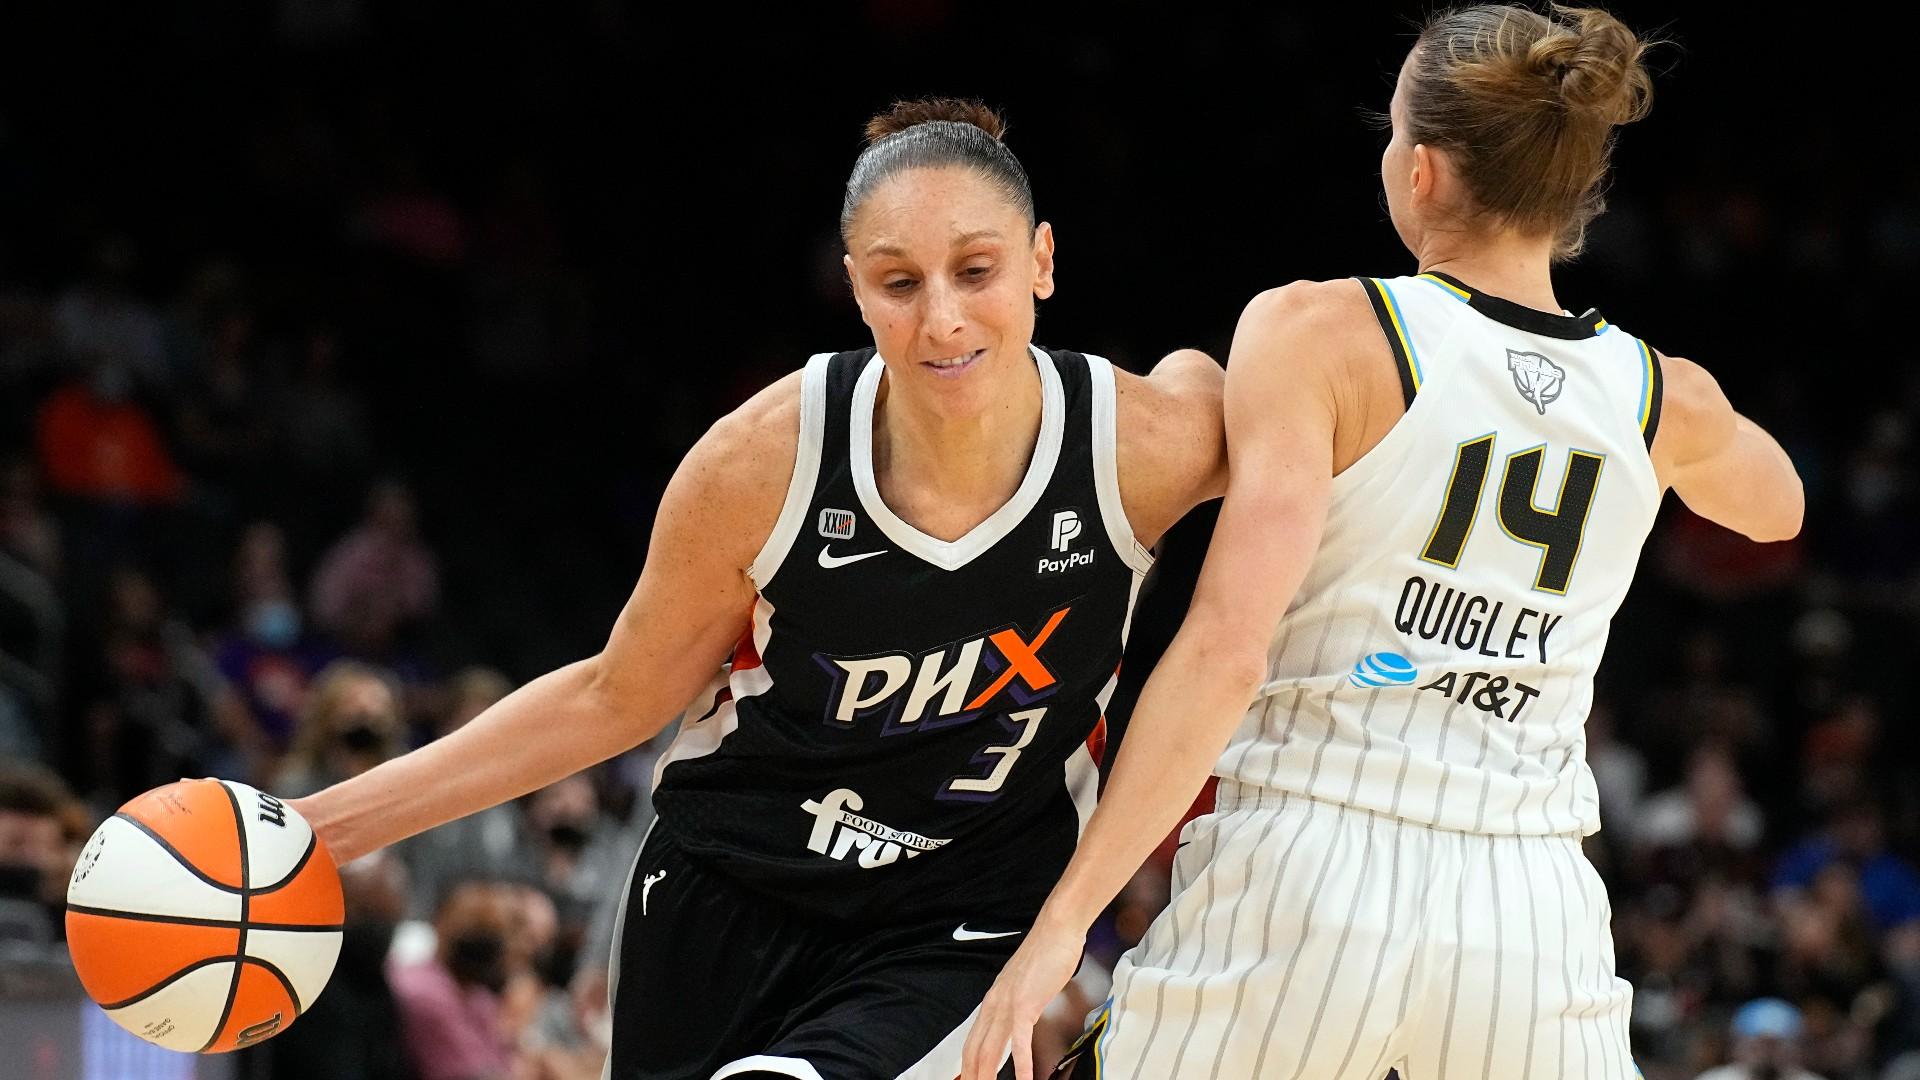 Phoenix Mercury guard Diana Taurasi drives on Chicago Sky guard Allie Quigley (14) during the first half of Game 2 of basketball's WNBA Finals, Wednesday, Oct. 13, 2021, in Phoenix. (AP Photo / Rick Scuteri)